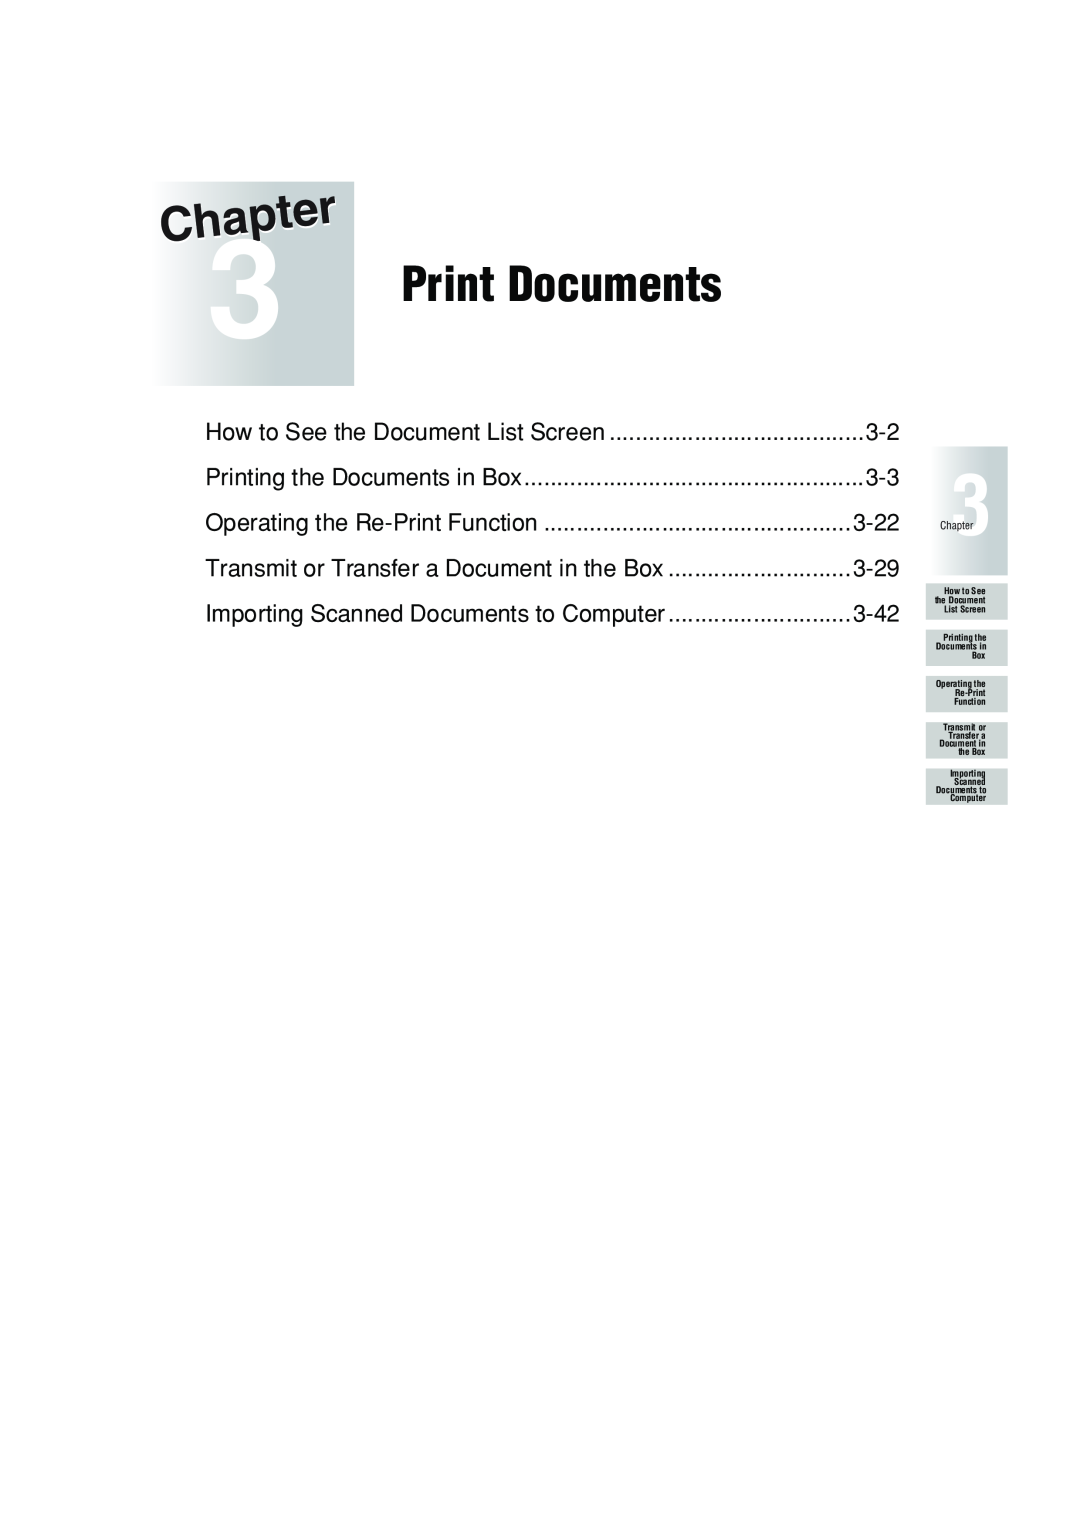 Konica Minolta 7222 Print Documents, Operating the Re-Print Function, 3-22, Transmit or Transfer a Document in the Box 